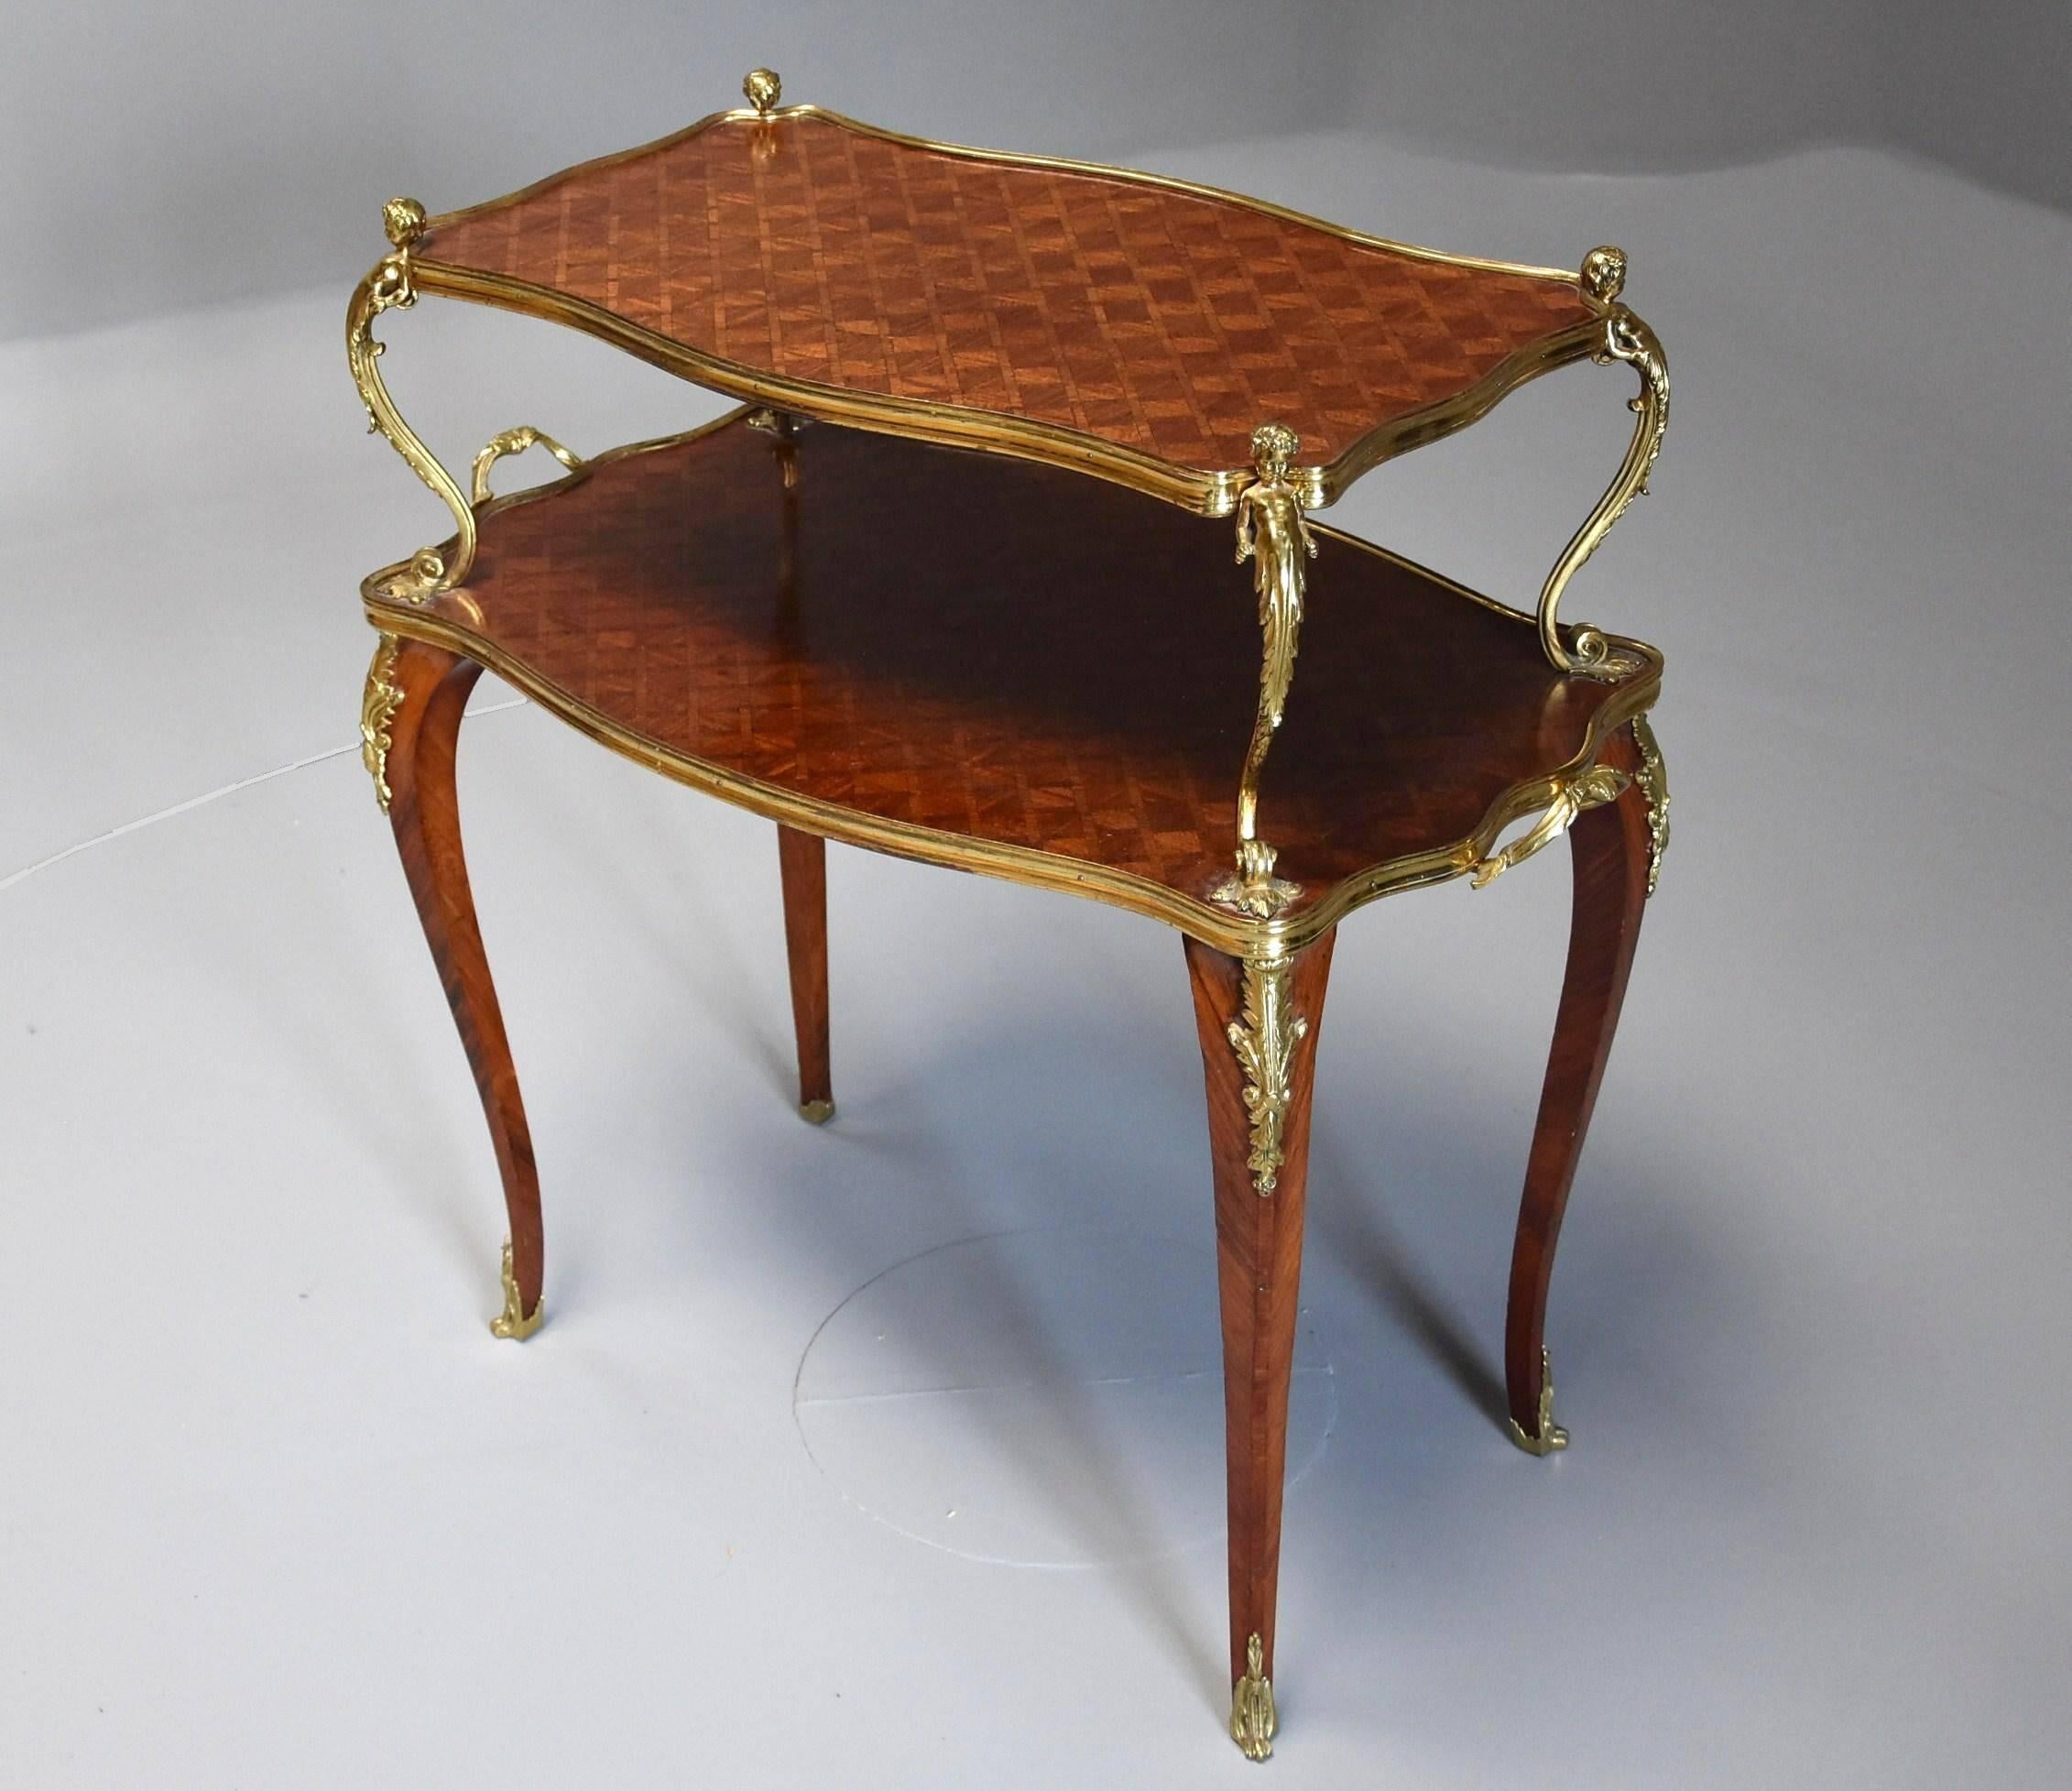 A fine quality French late 19th century kingwood two-tier freestanding serpentine shaped etagere with parquetry decoration. 

This highly decorative etagere has two tiers, the top tier having kingwood parquetry decoration with a gilt metal moulded